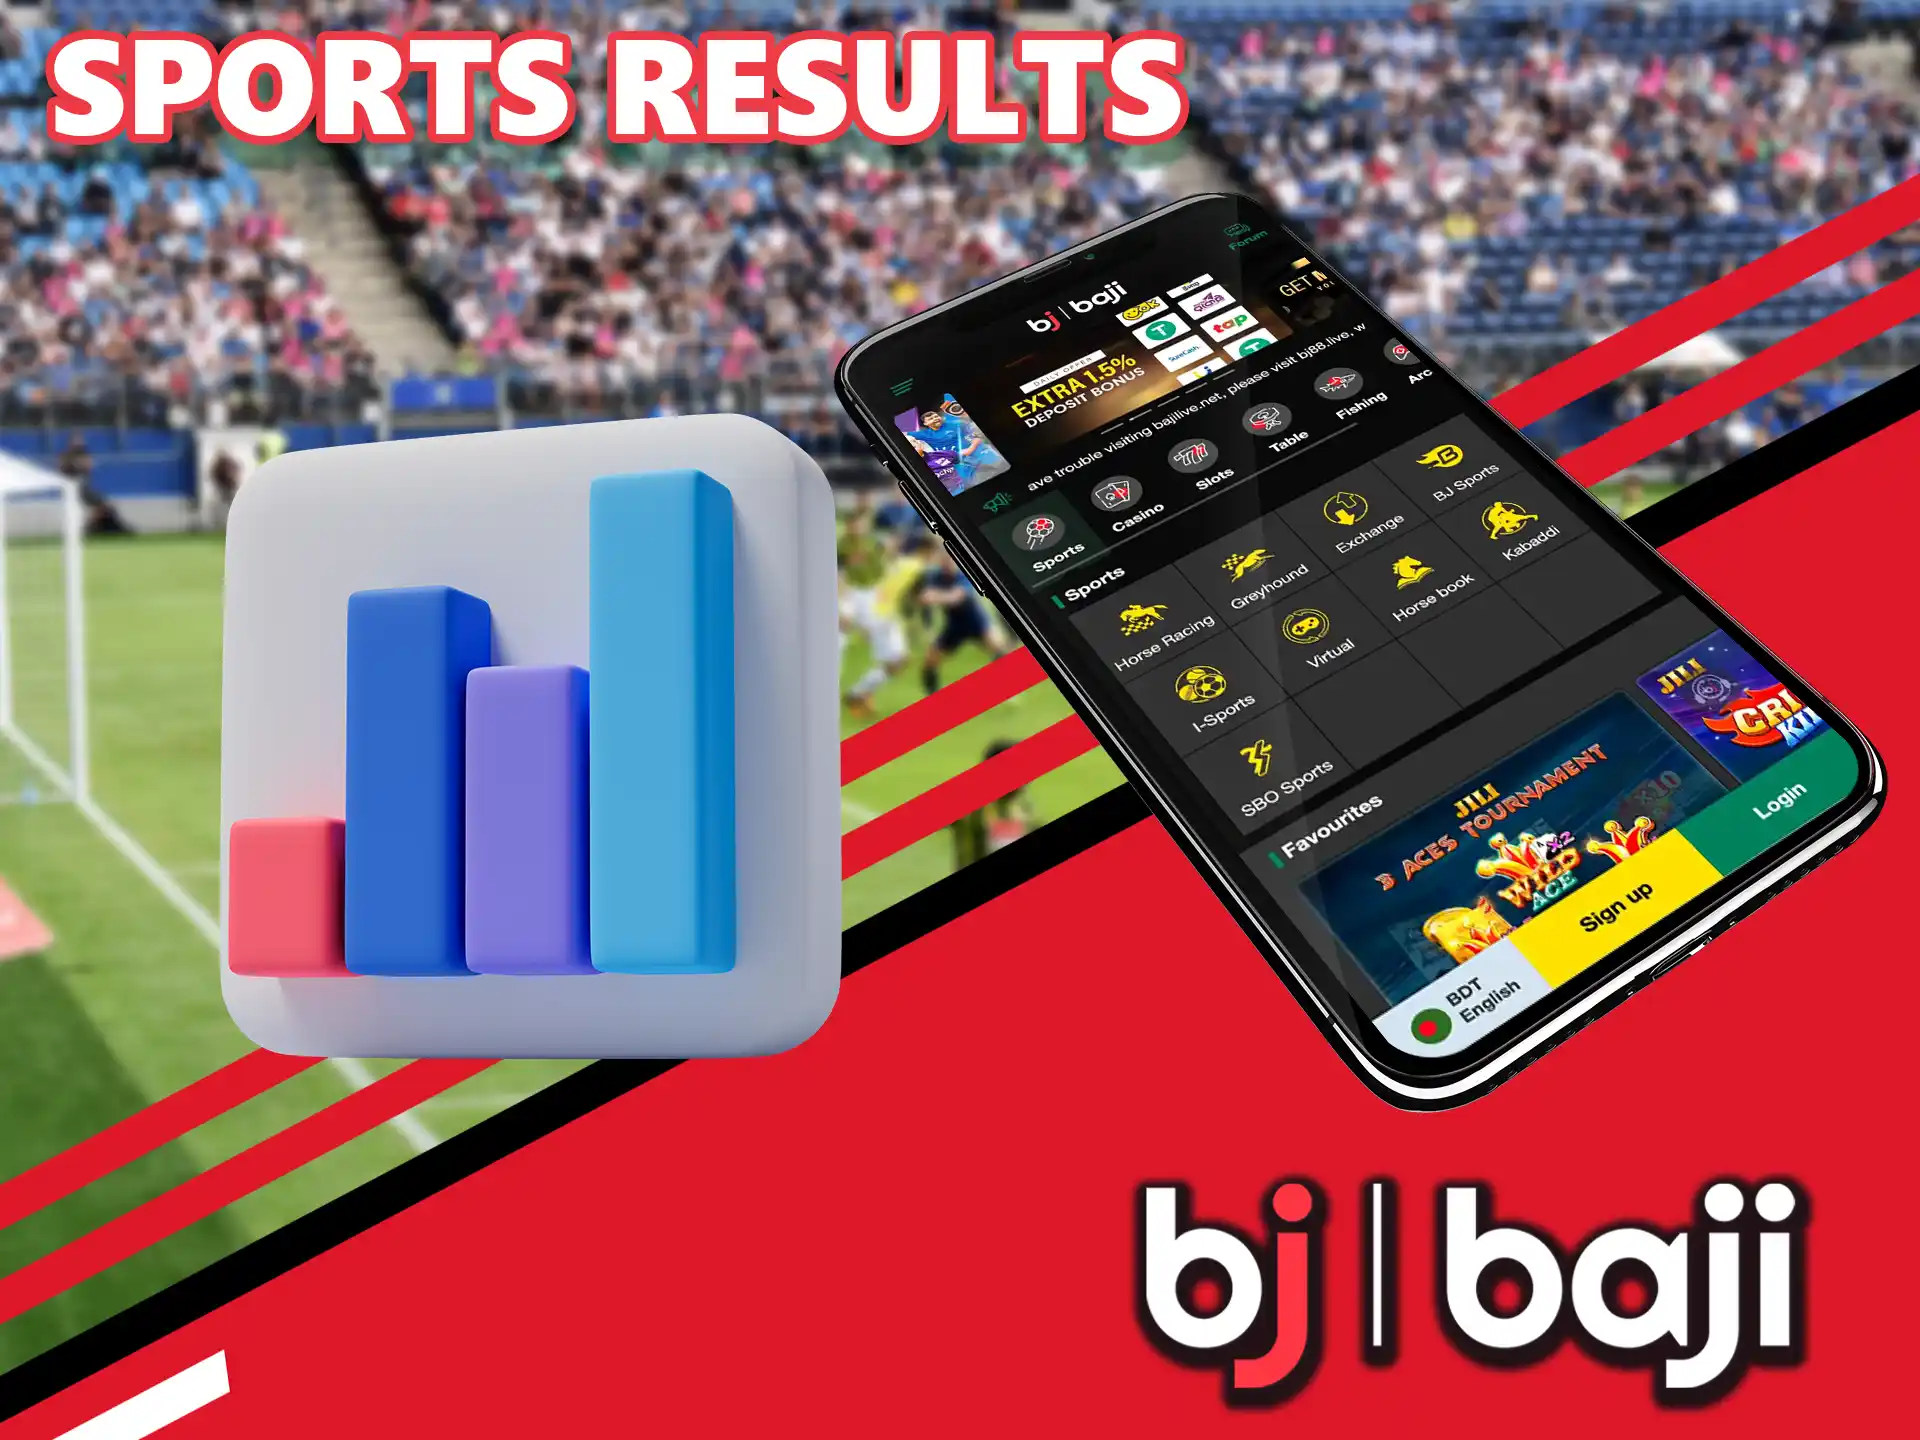 Get the most detailed information on match results and stay up to date with the latest happenings in Baji.